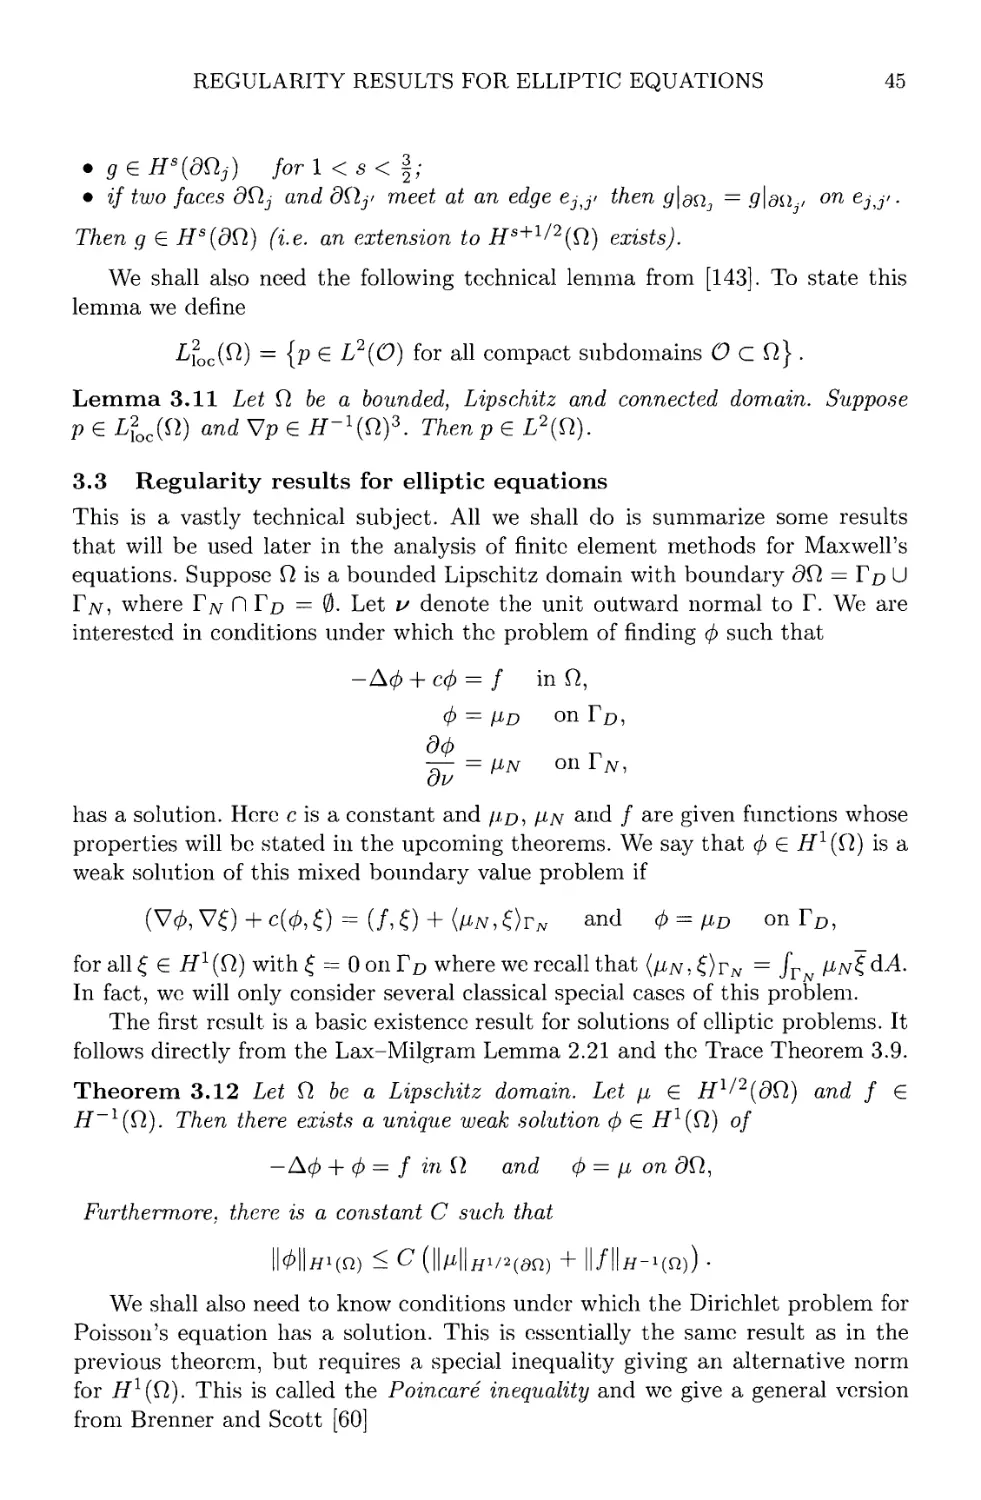 3.3 Regularity results for elliptic equations